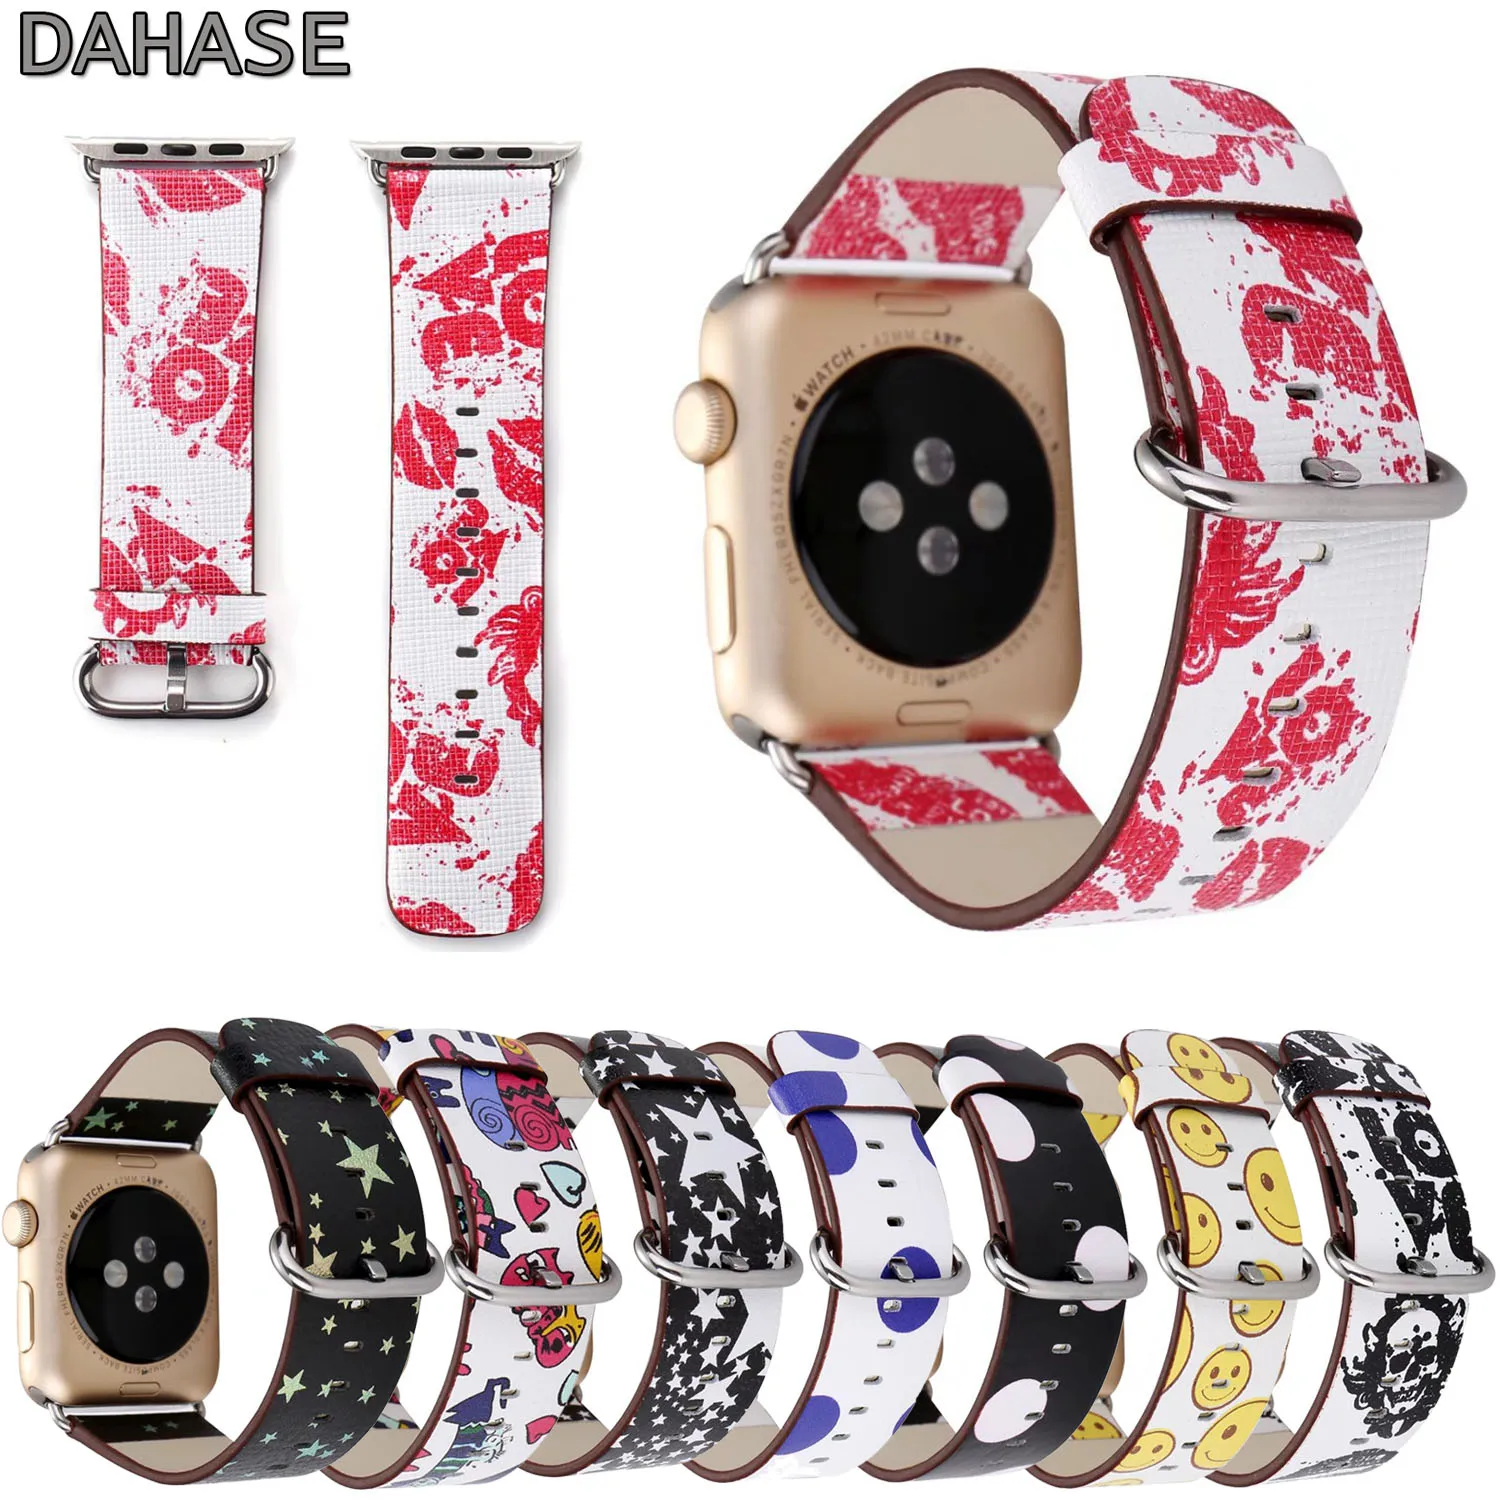 

DAHASE Stars Skull Dots Watchband Leather Band Cartoon Bracelet Wristband for Apple Watch Series 3 2 1 iWatch Strap 42mm 38mm